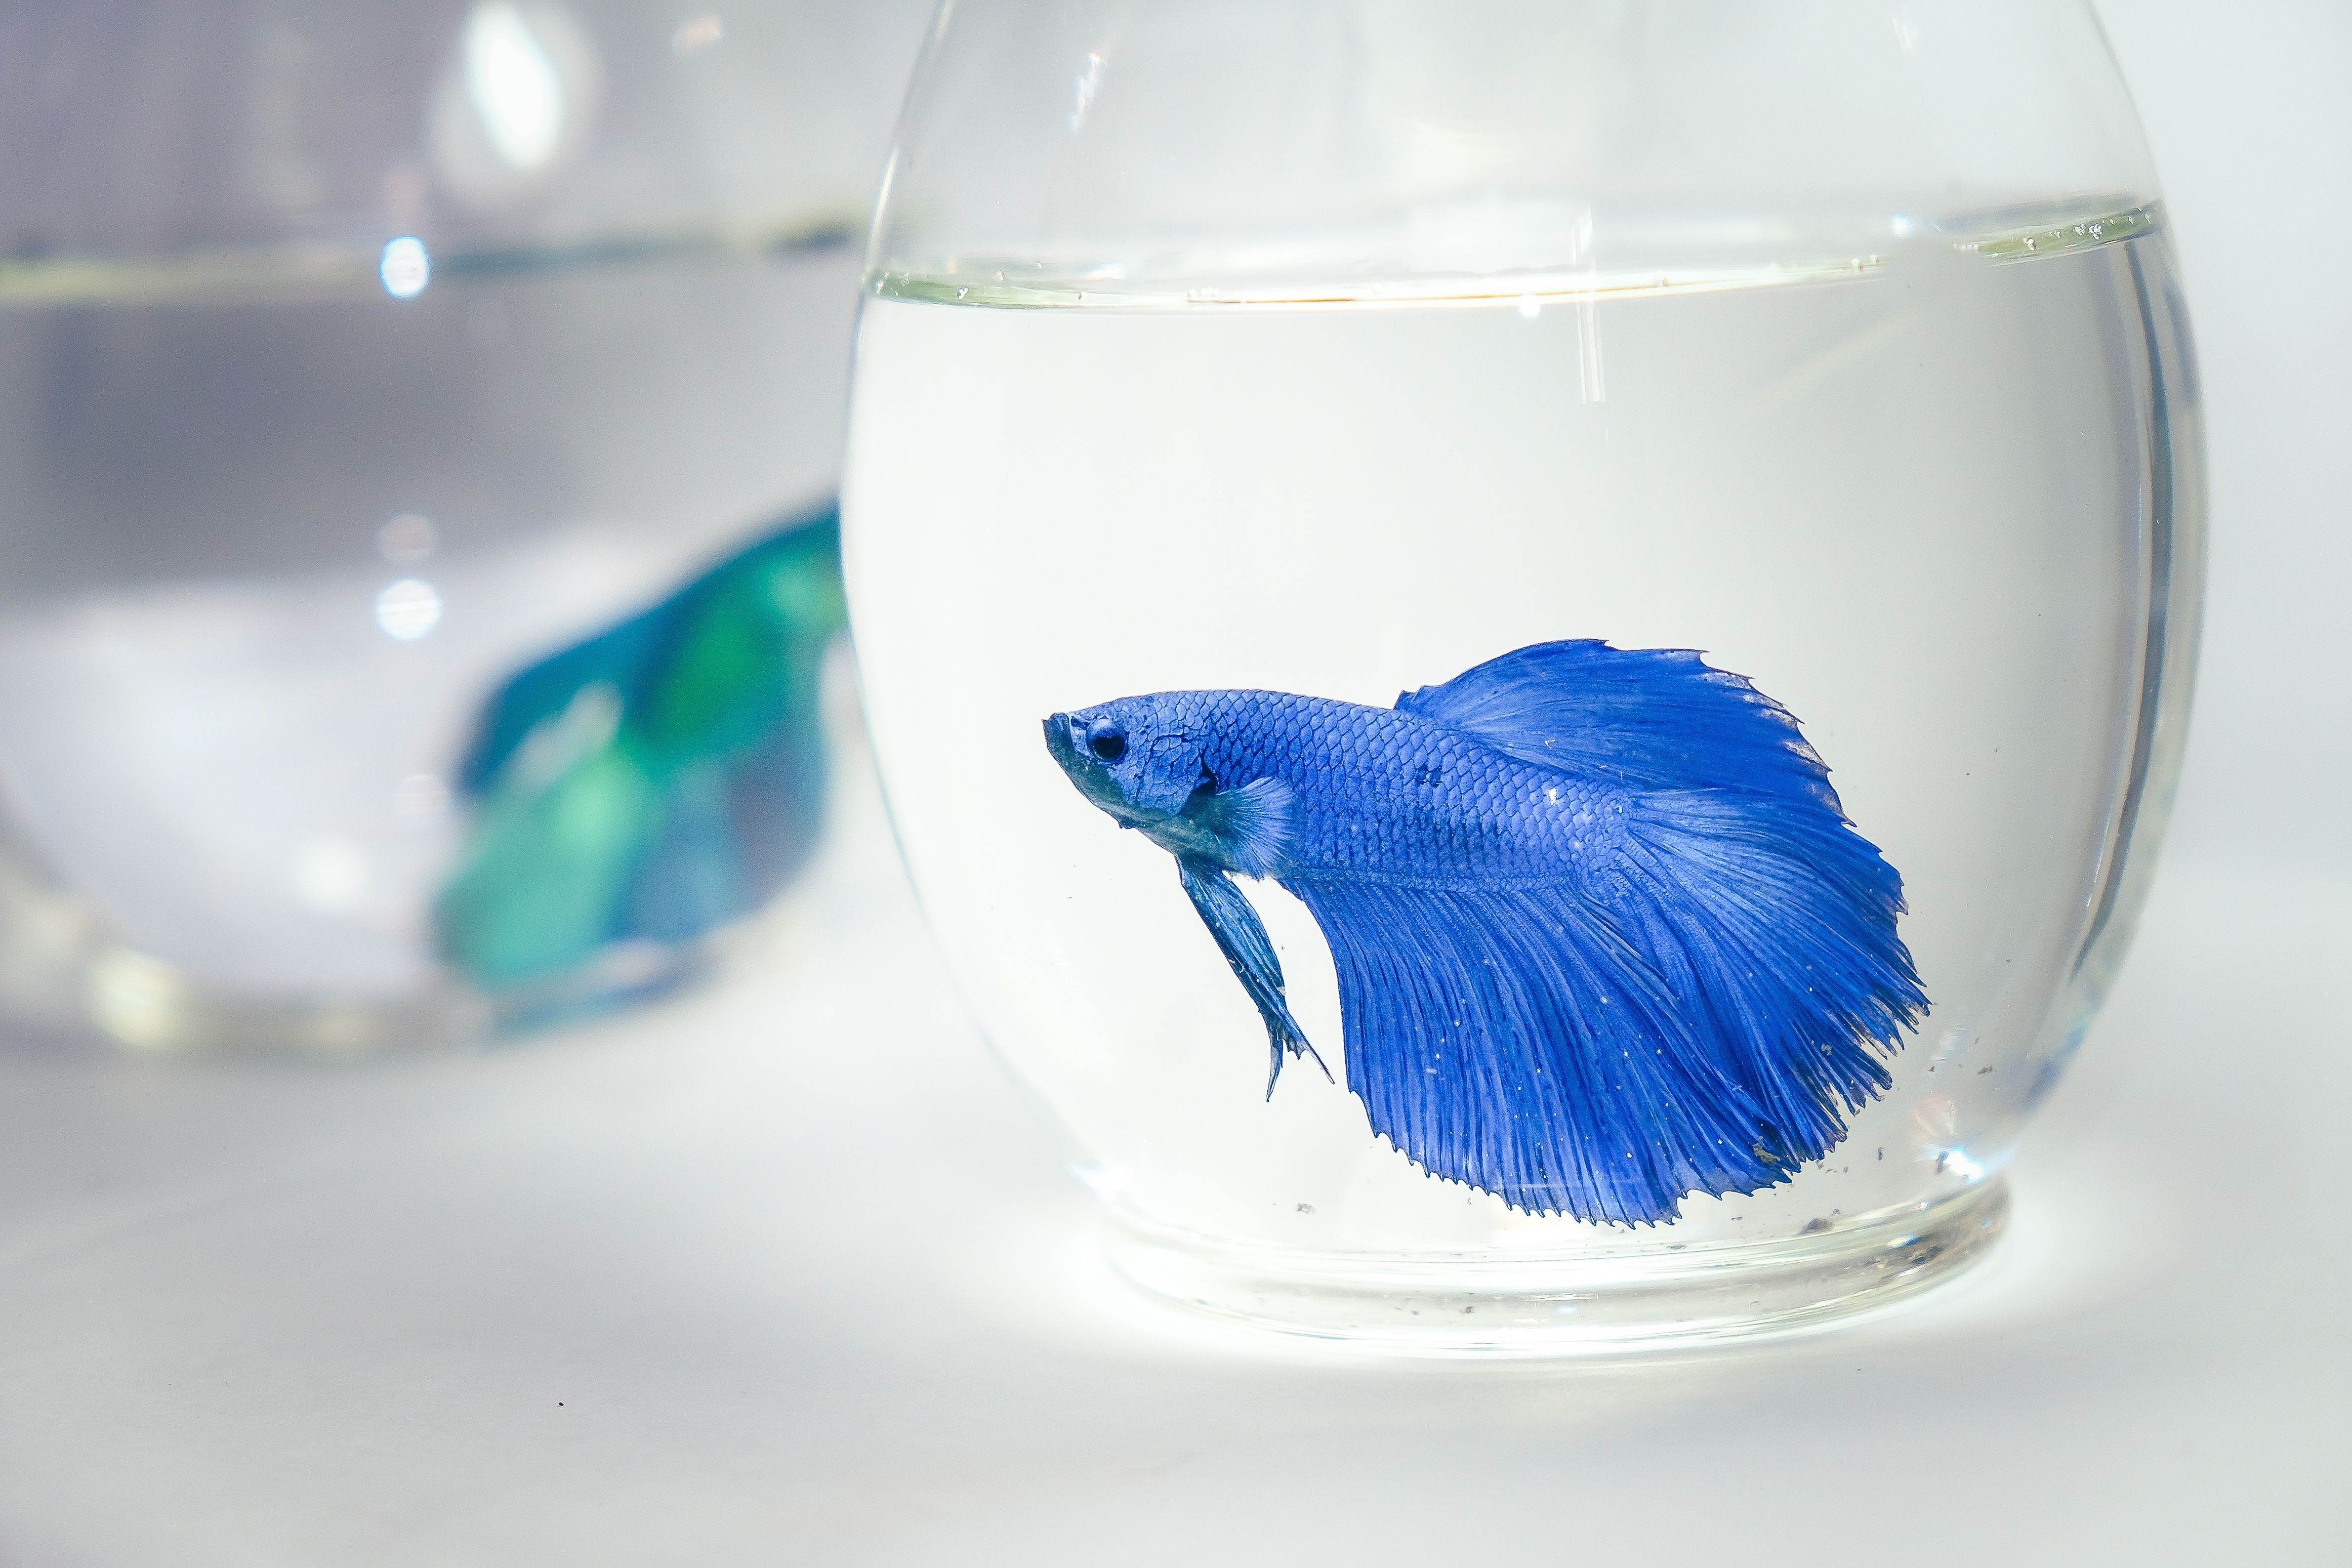 Should You Keep Your Betta Fish in a Vase?